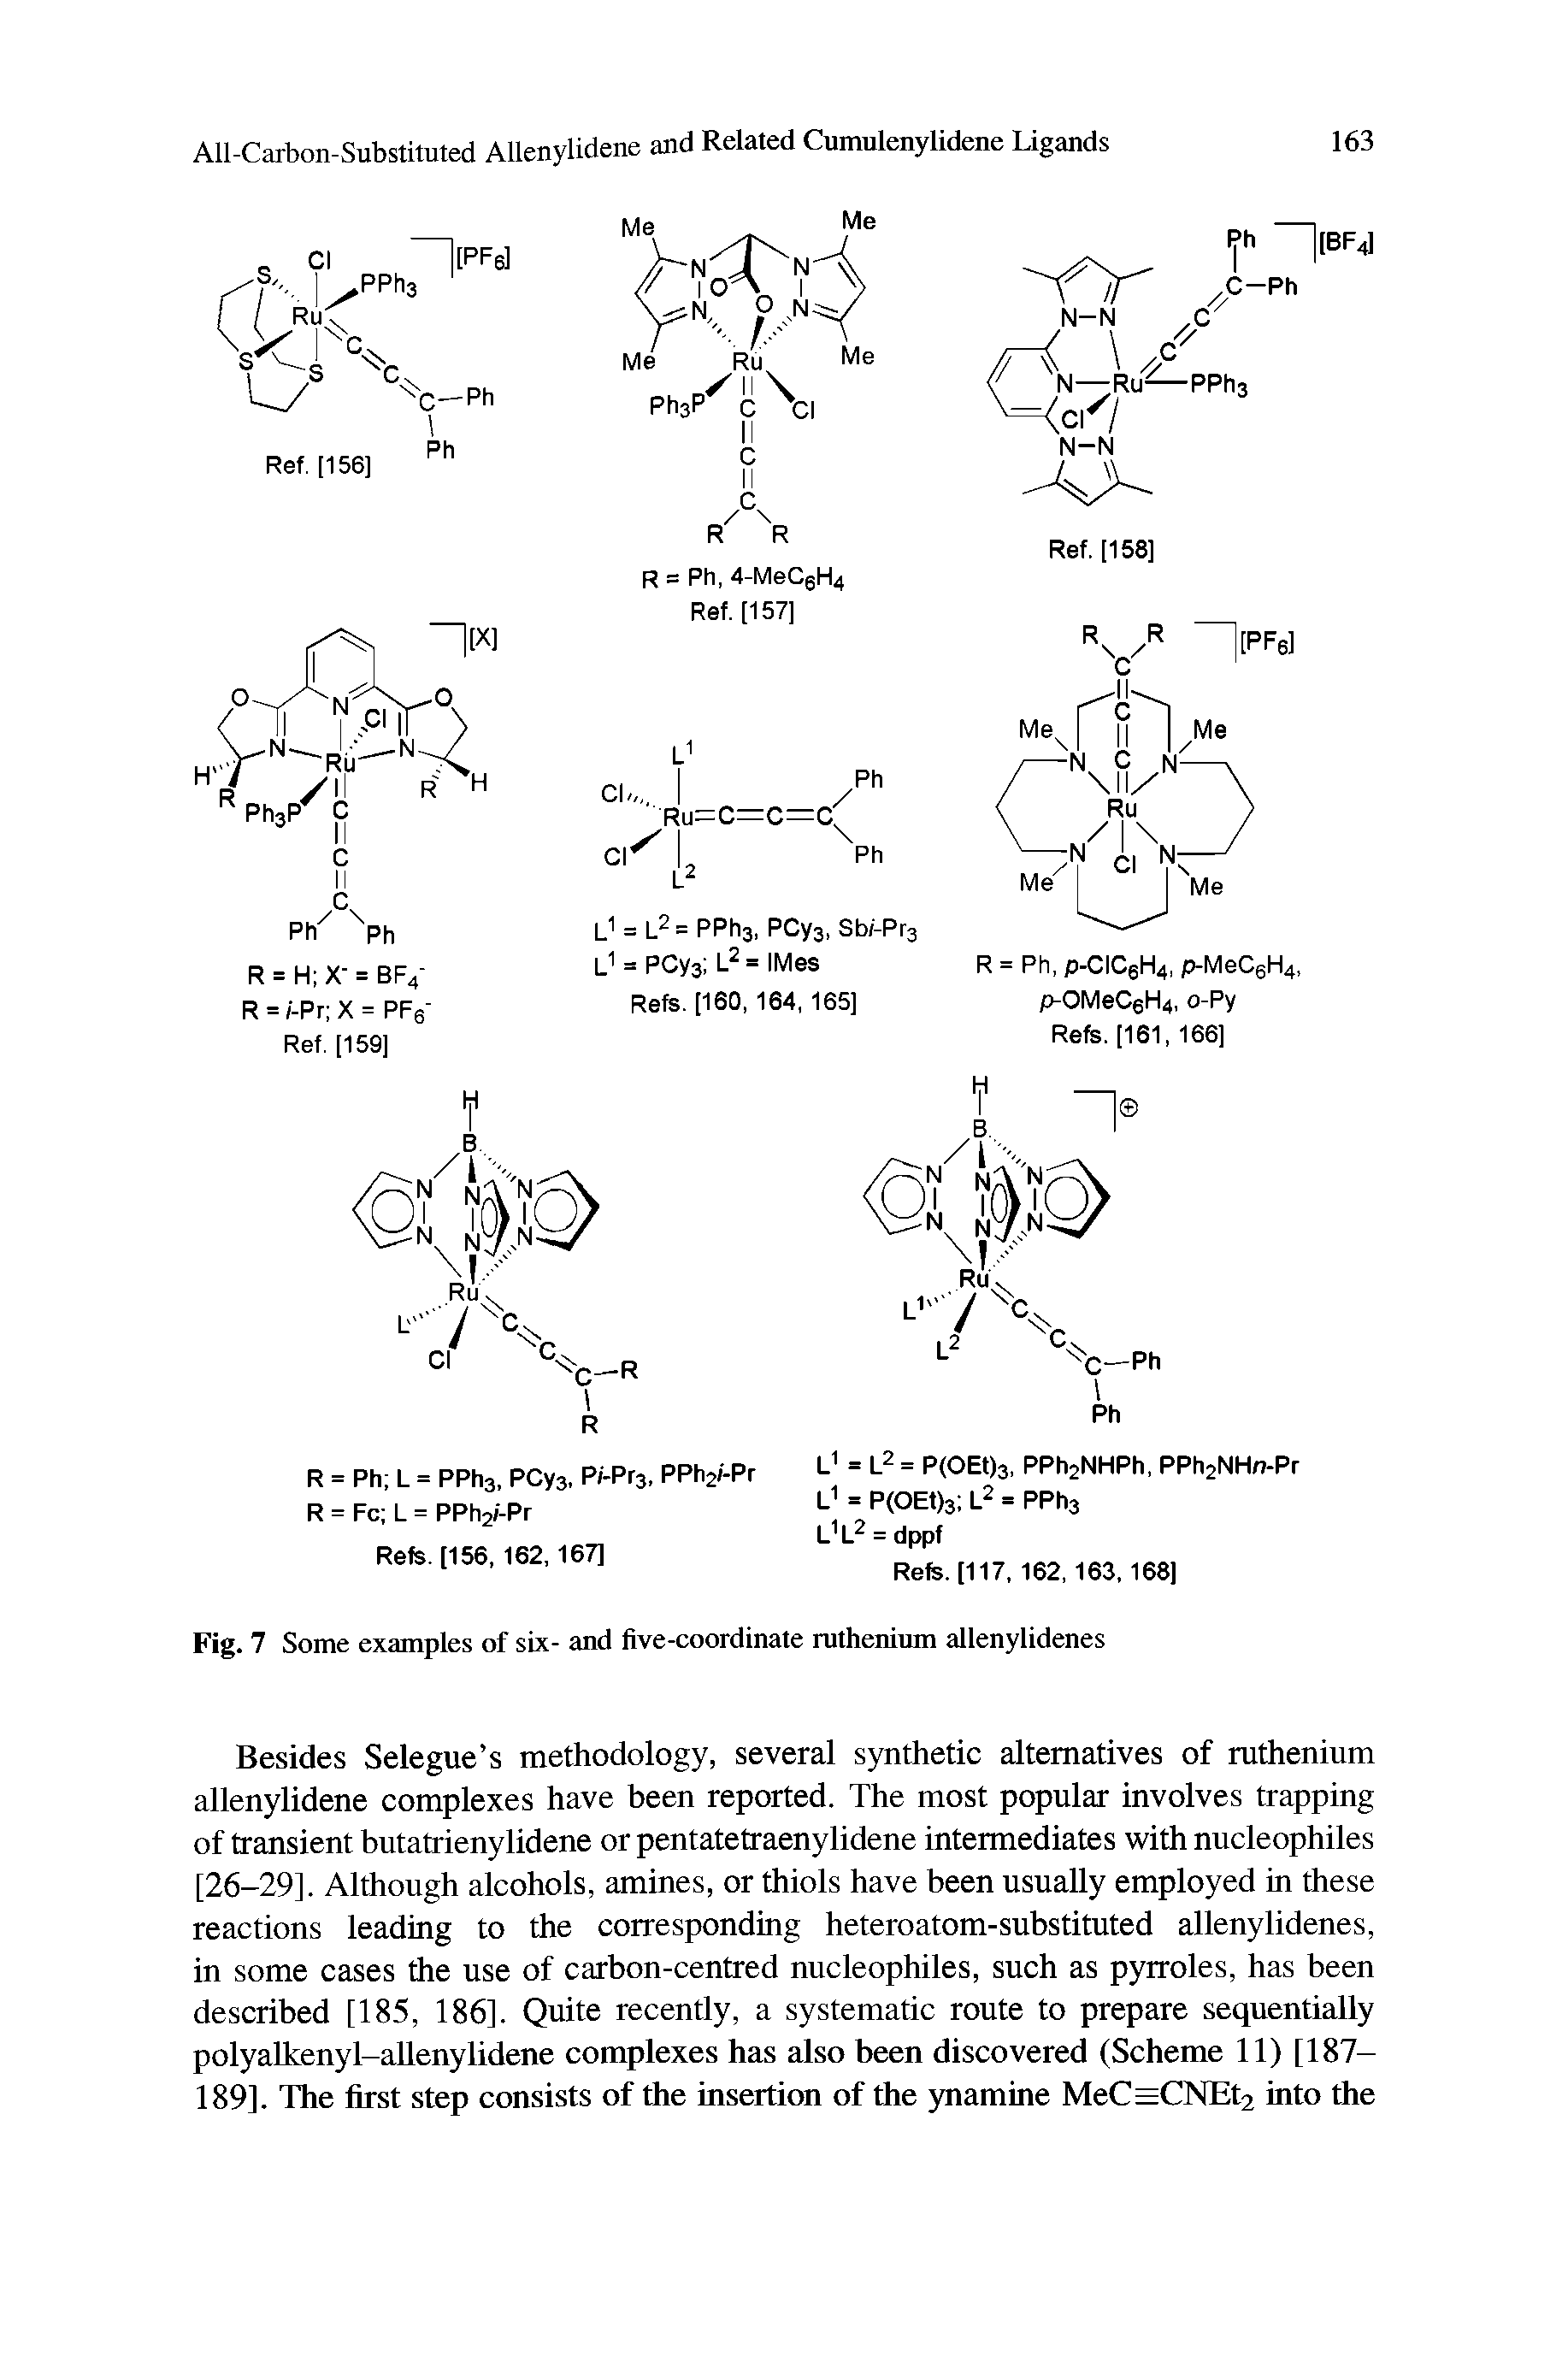 Fig. 7 Some examples of six- and five-coordinate ruthenium allenylidenes...